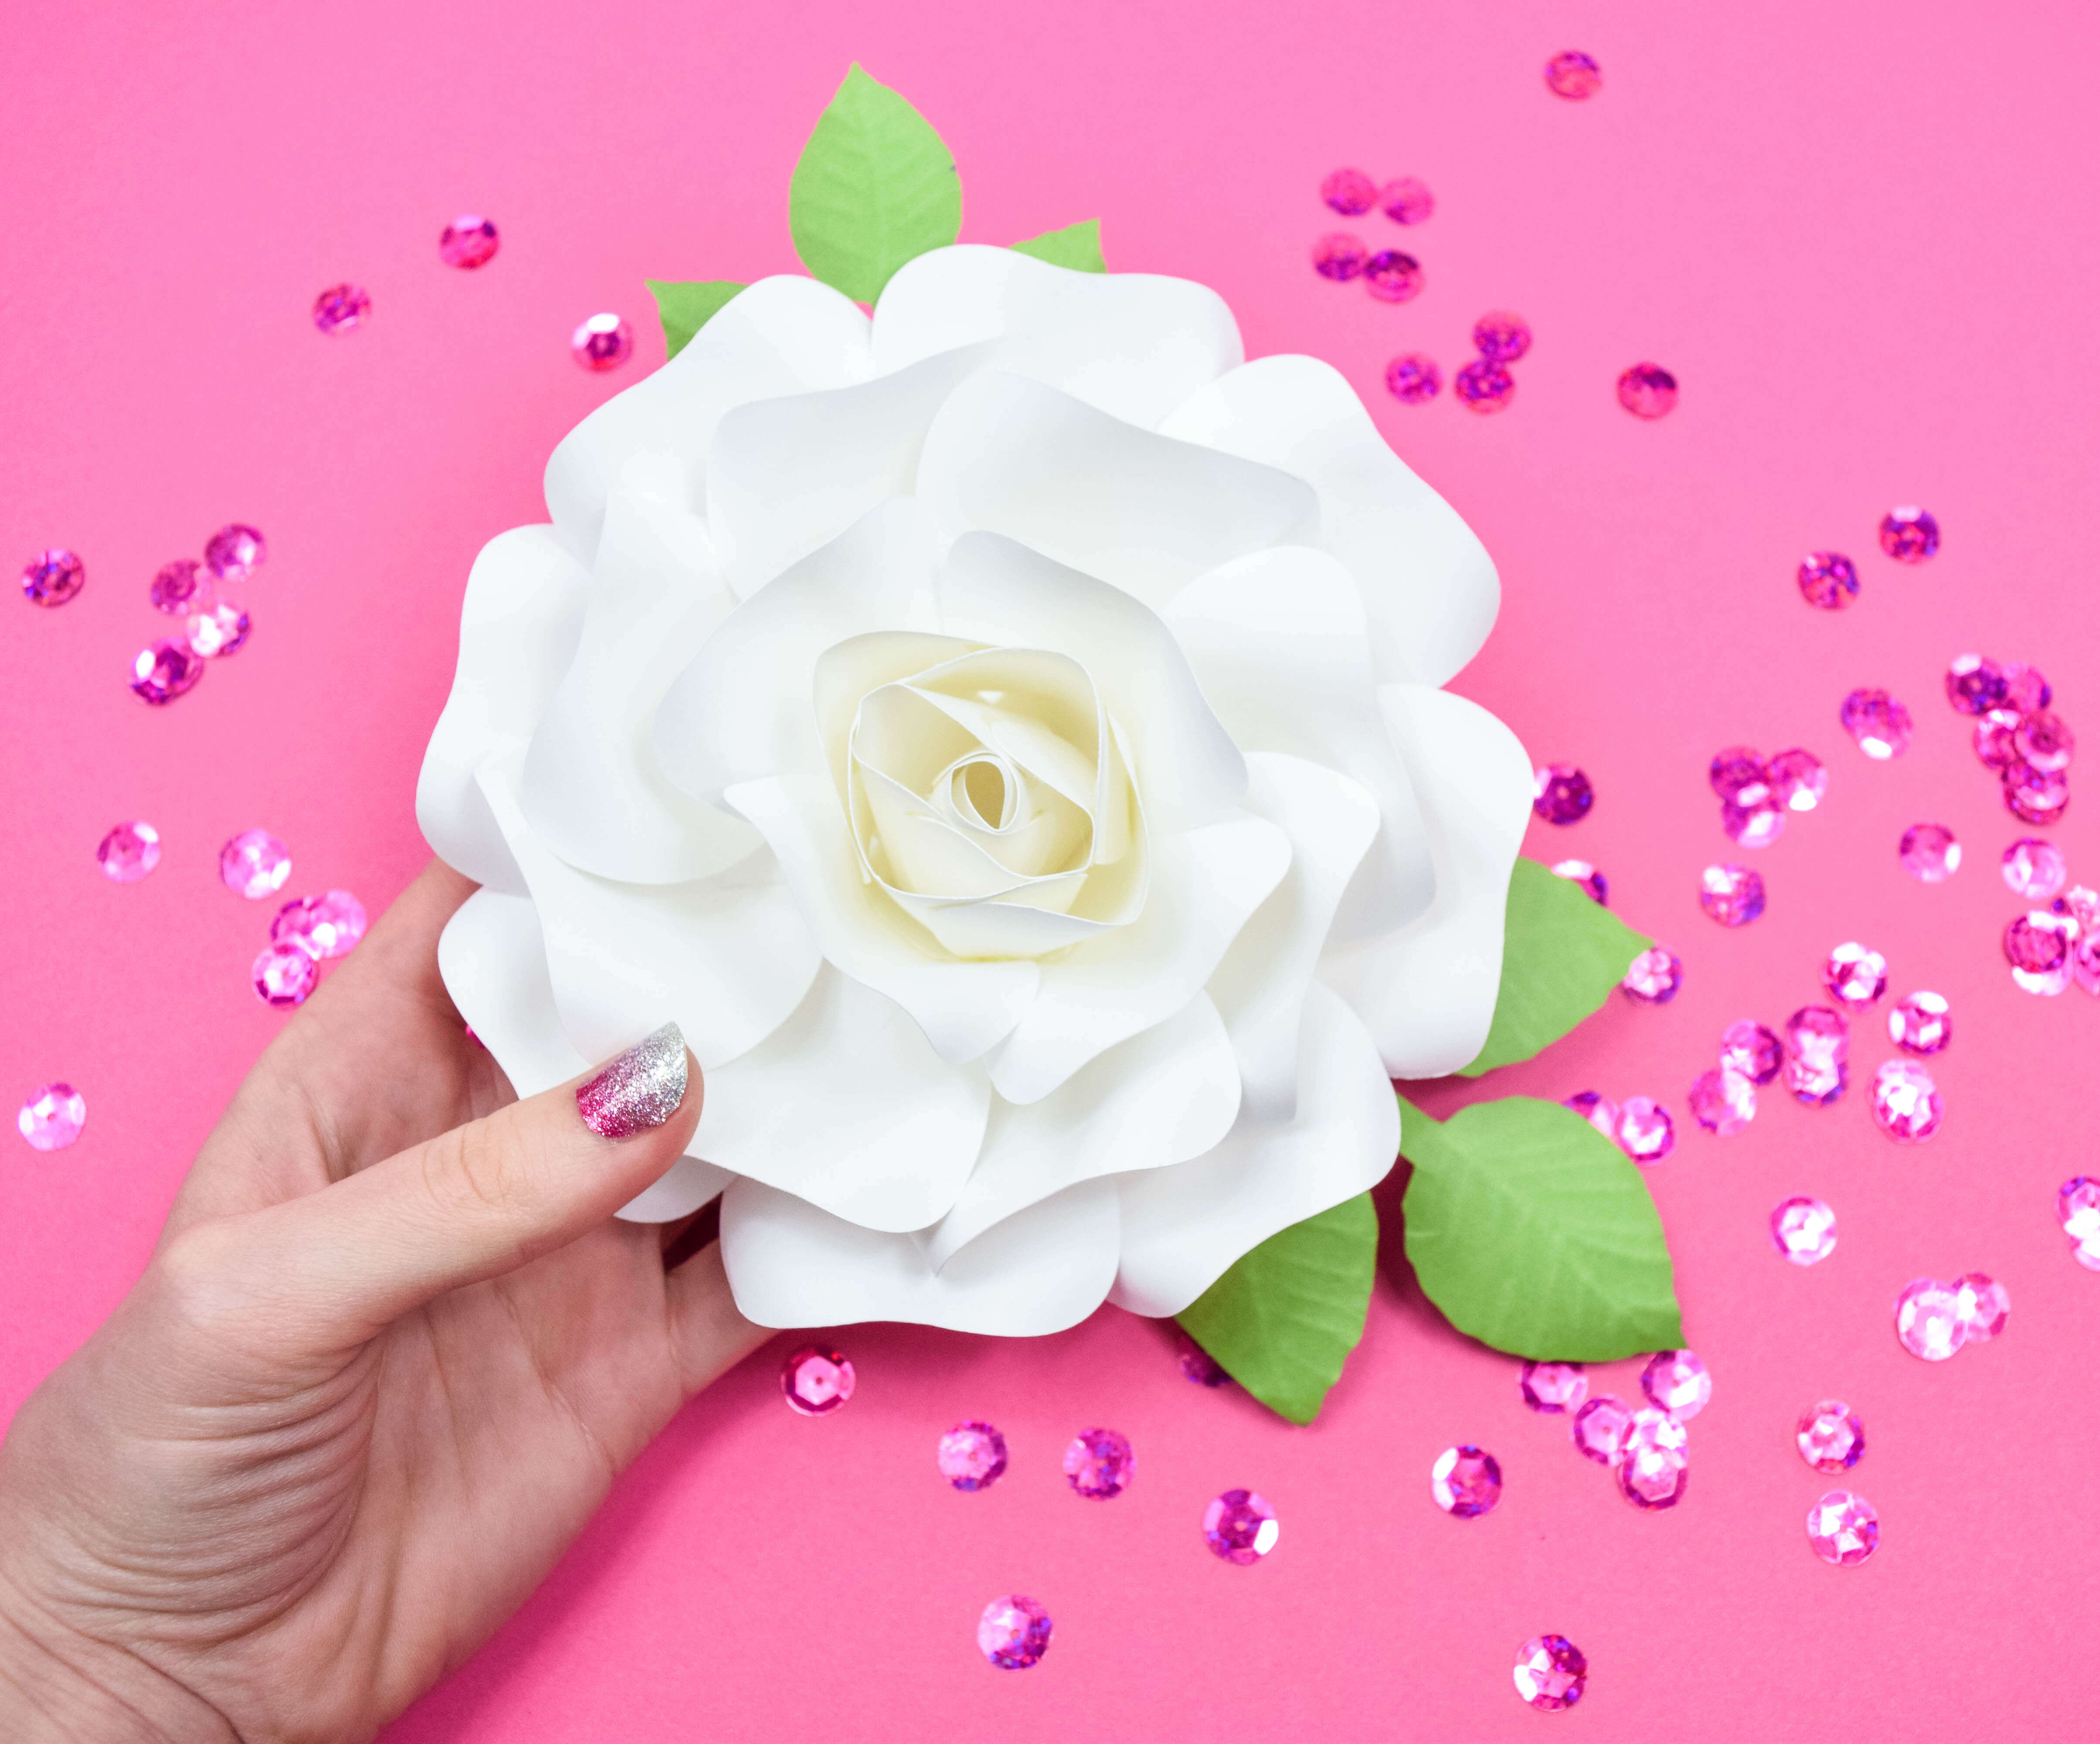 A woman's hand holds a large white paper rose flower against a pink background that's sprinkled with pink sequins.